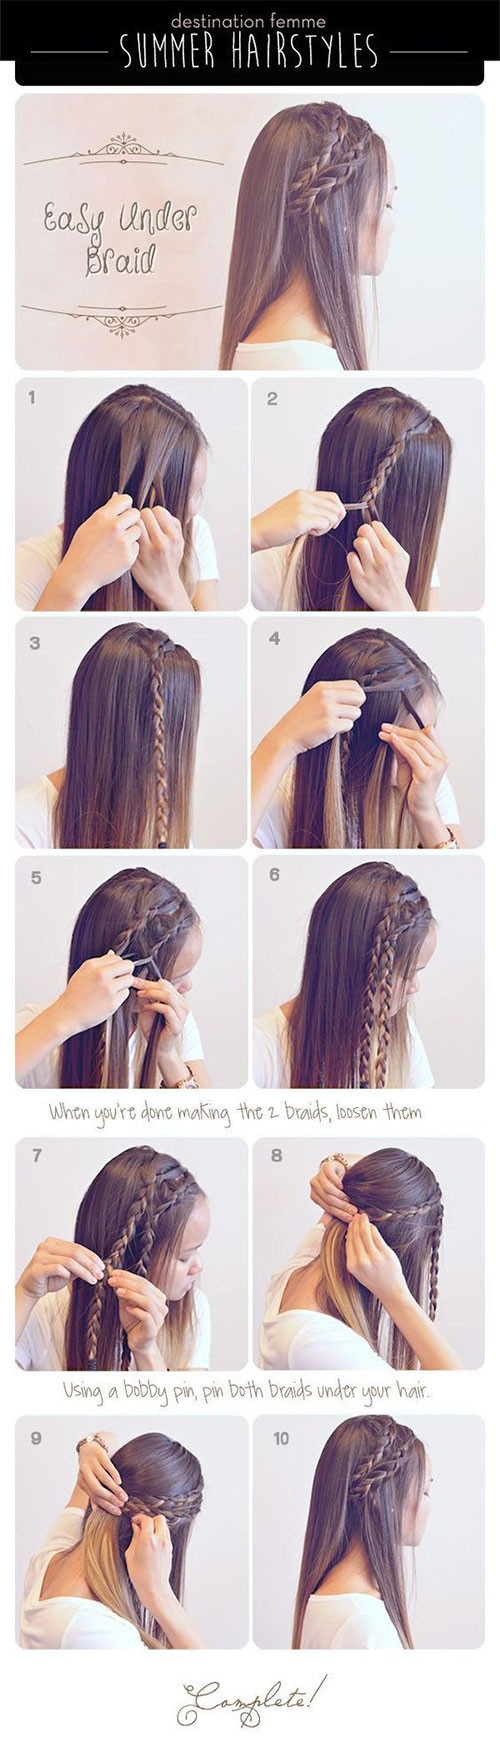 Cute And Easy Step By Step Hairstyles
 12 Easy Step By Step Summer Hairstyle Tutorials For